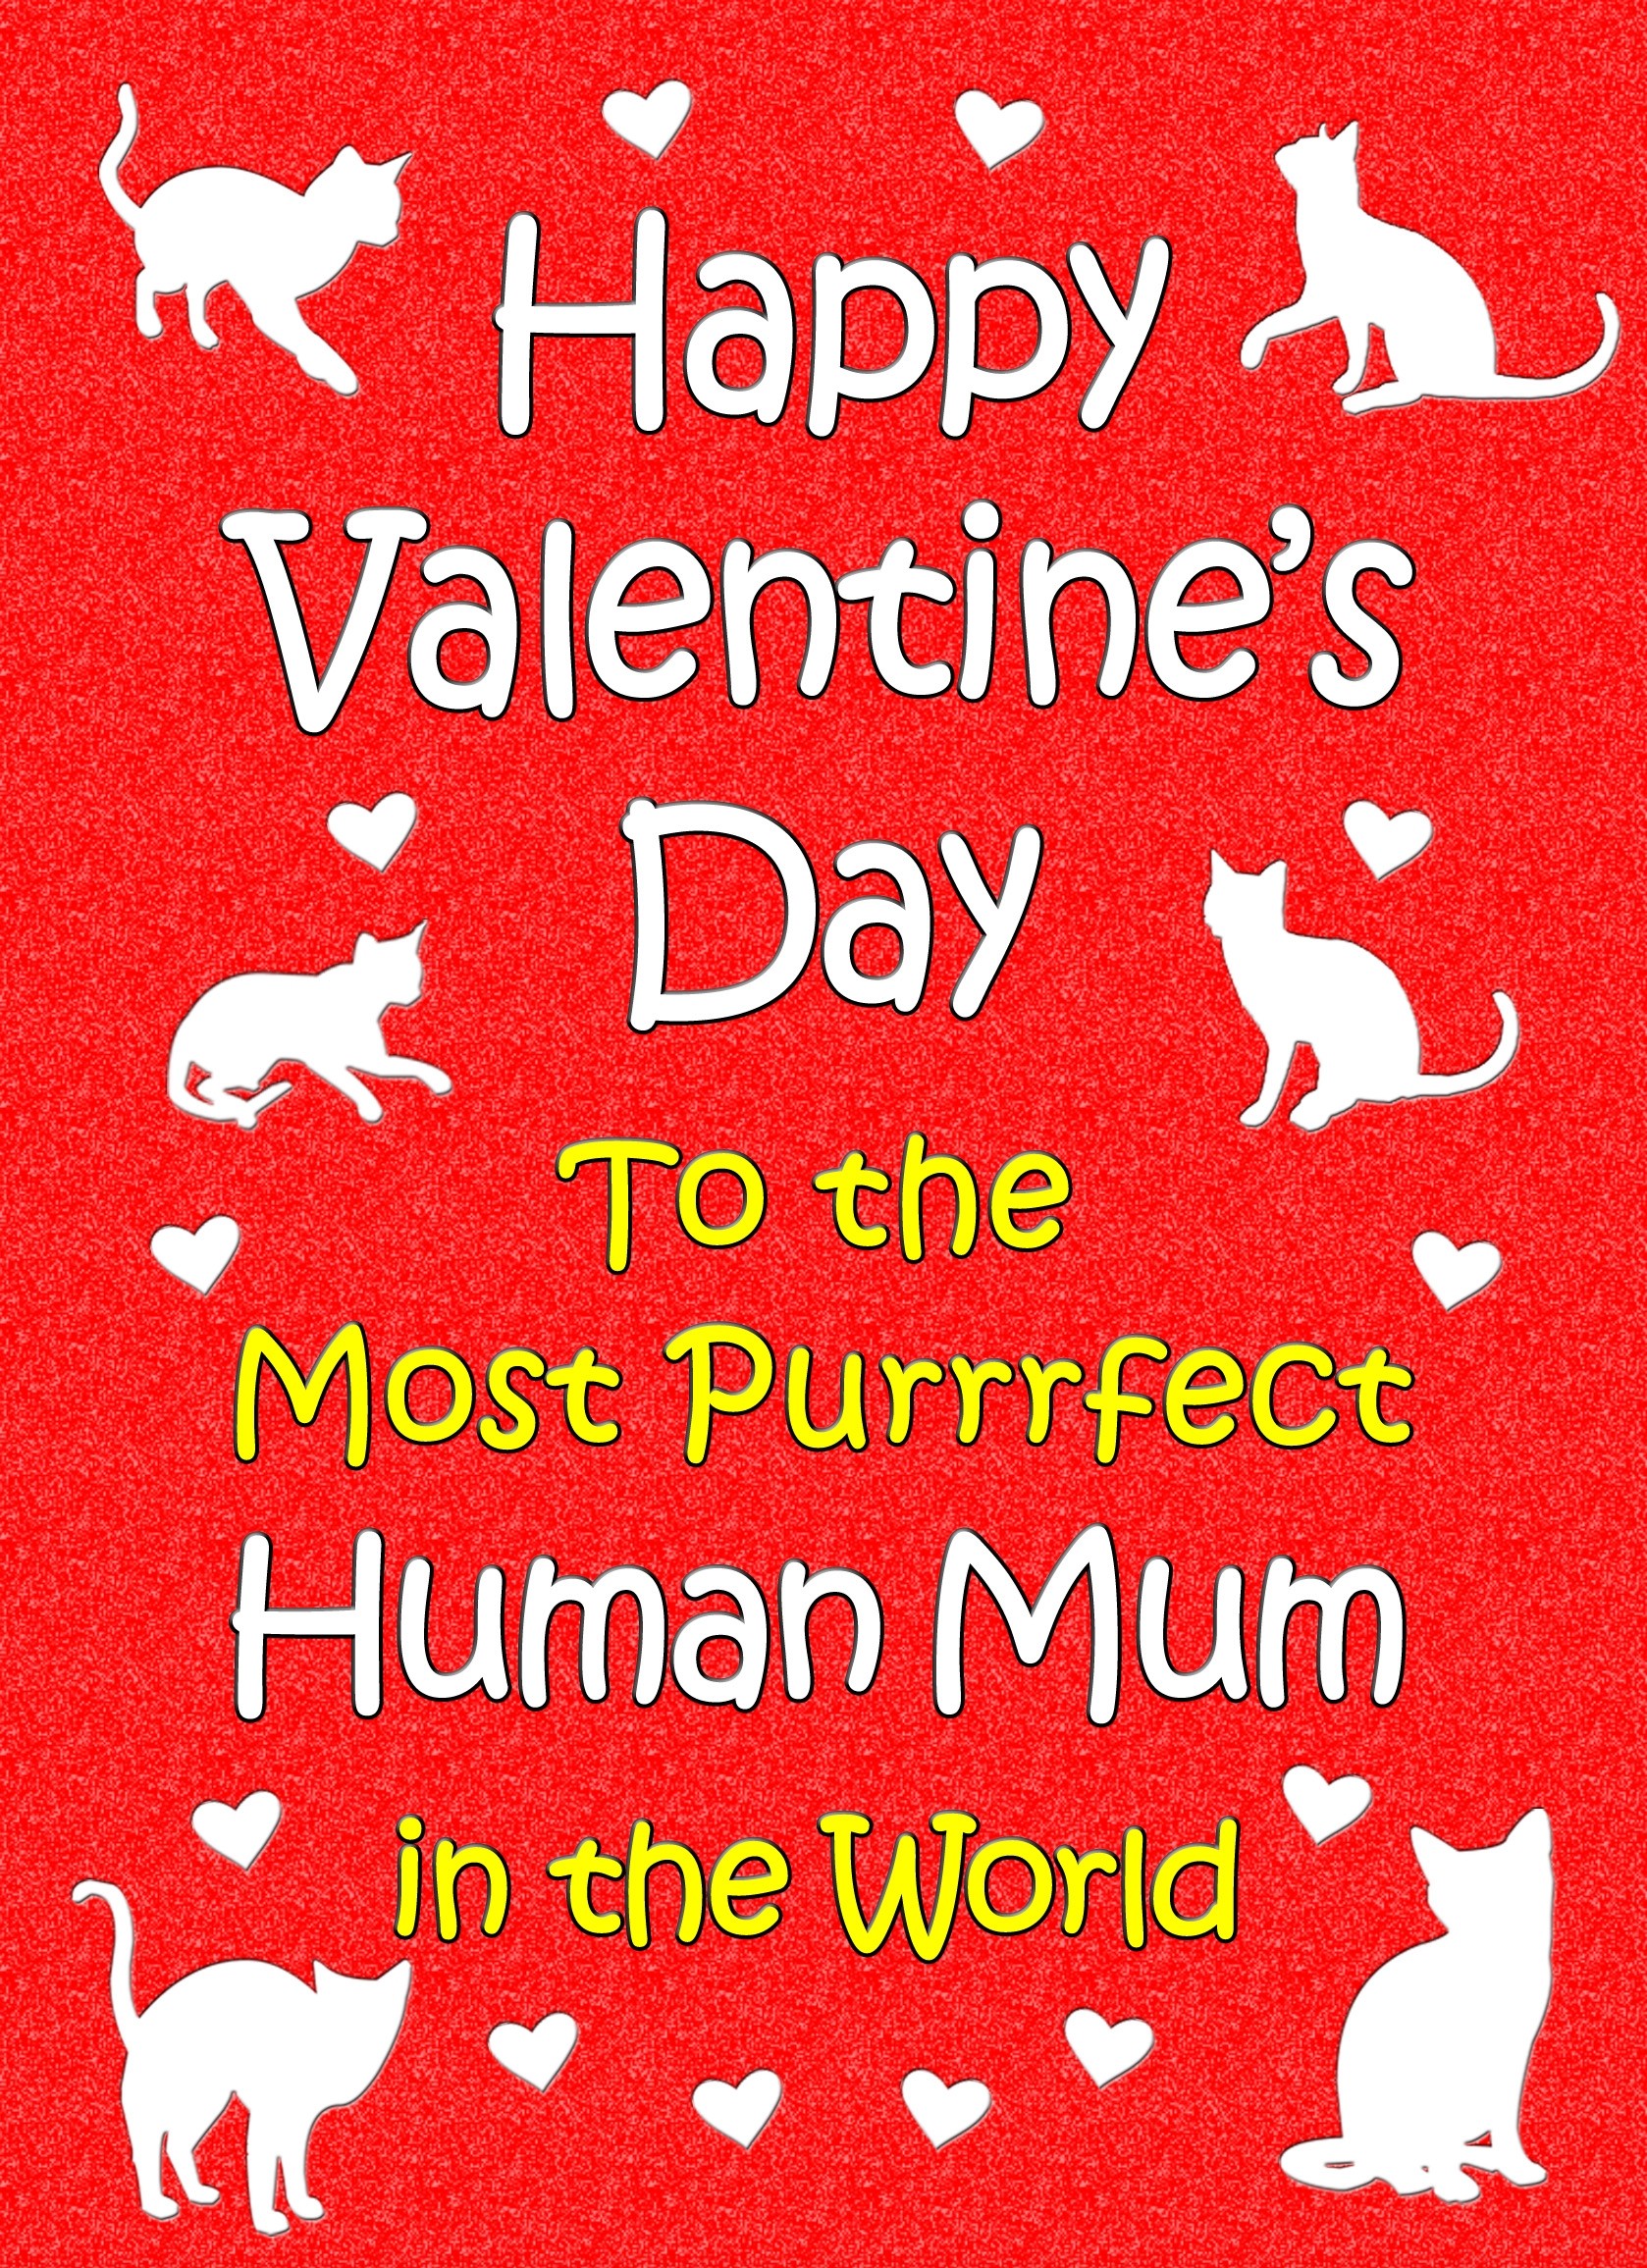 From The Cat Valentines Day Card (Human Mum)